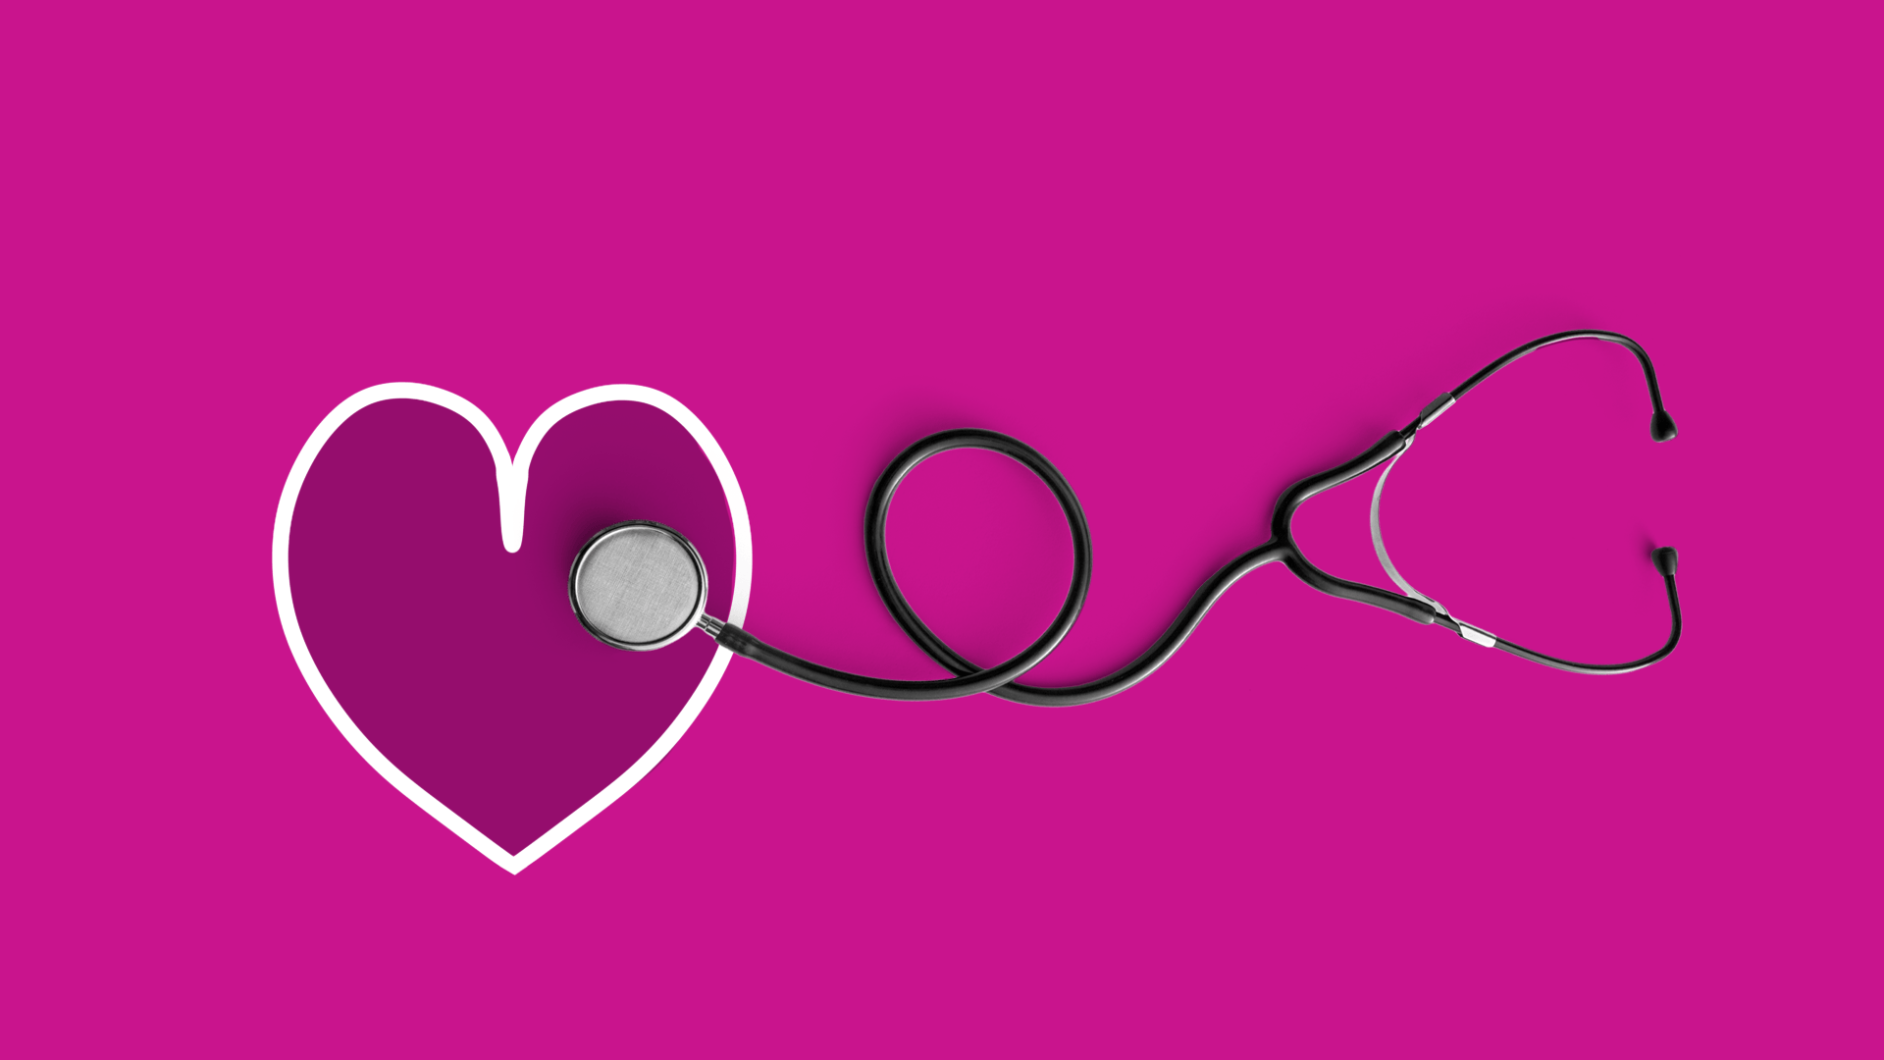 A heart with a stethoscope represents living with afib